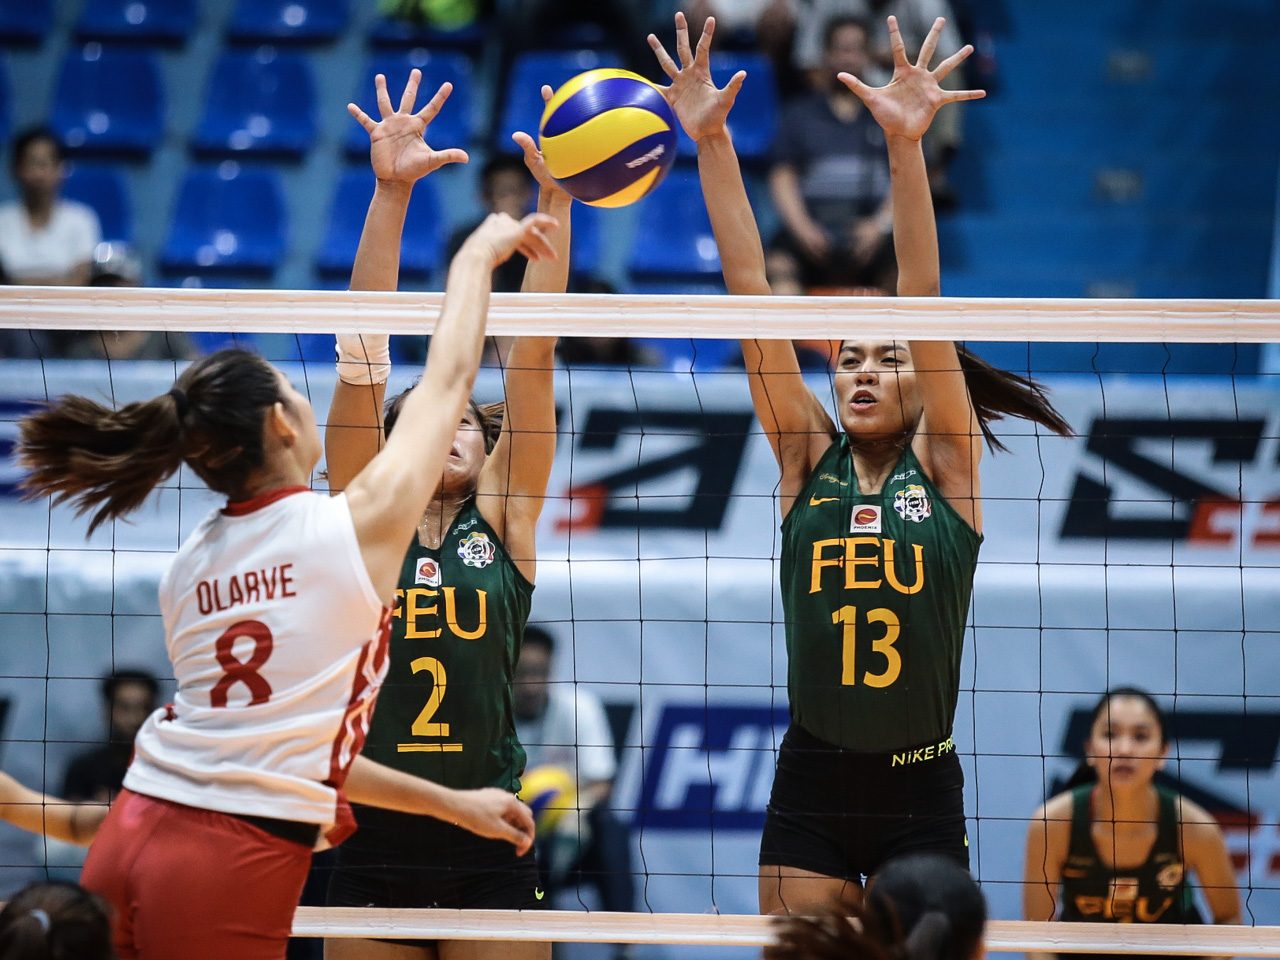 Celine Domingo sympathizes with former team UE’s woes